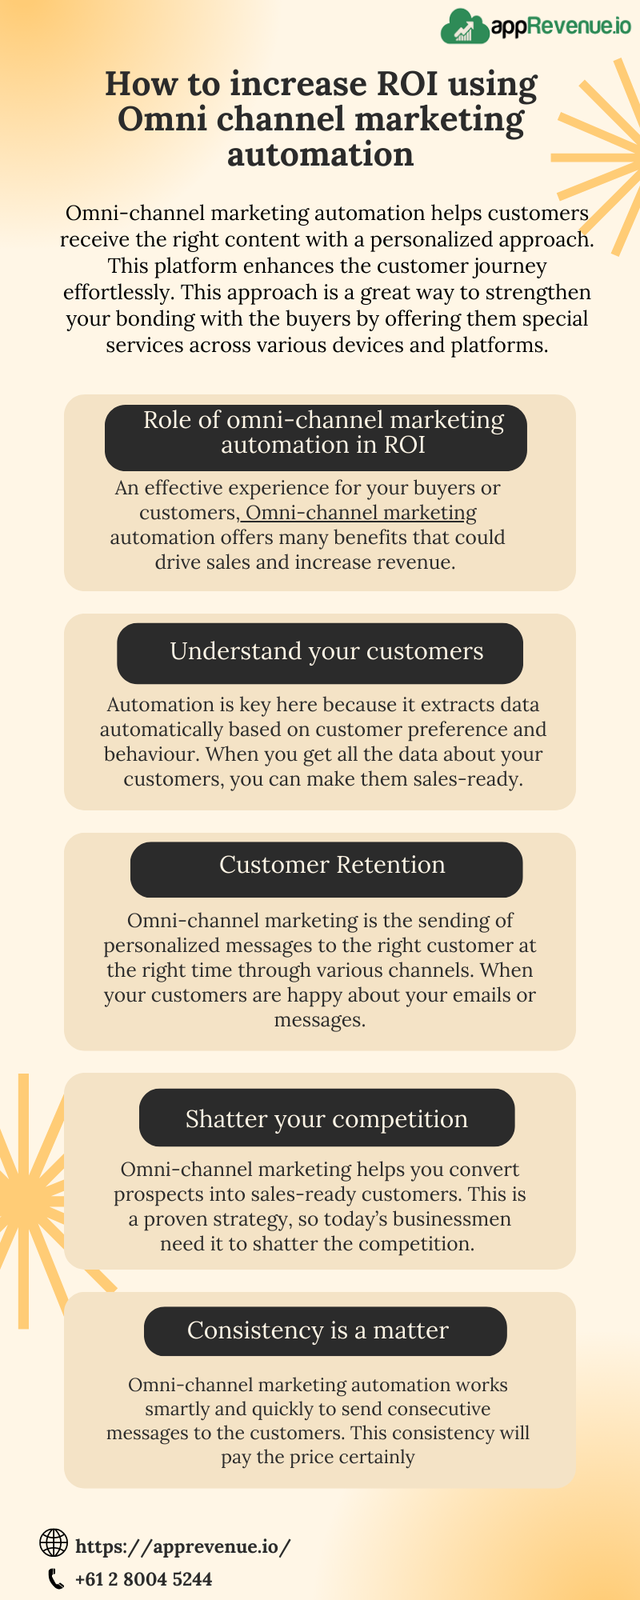  Increase ROI by using Omni channel marketing automation